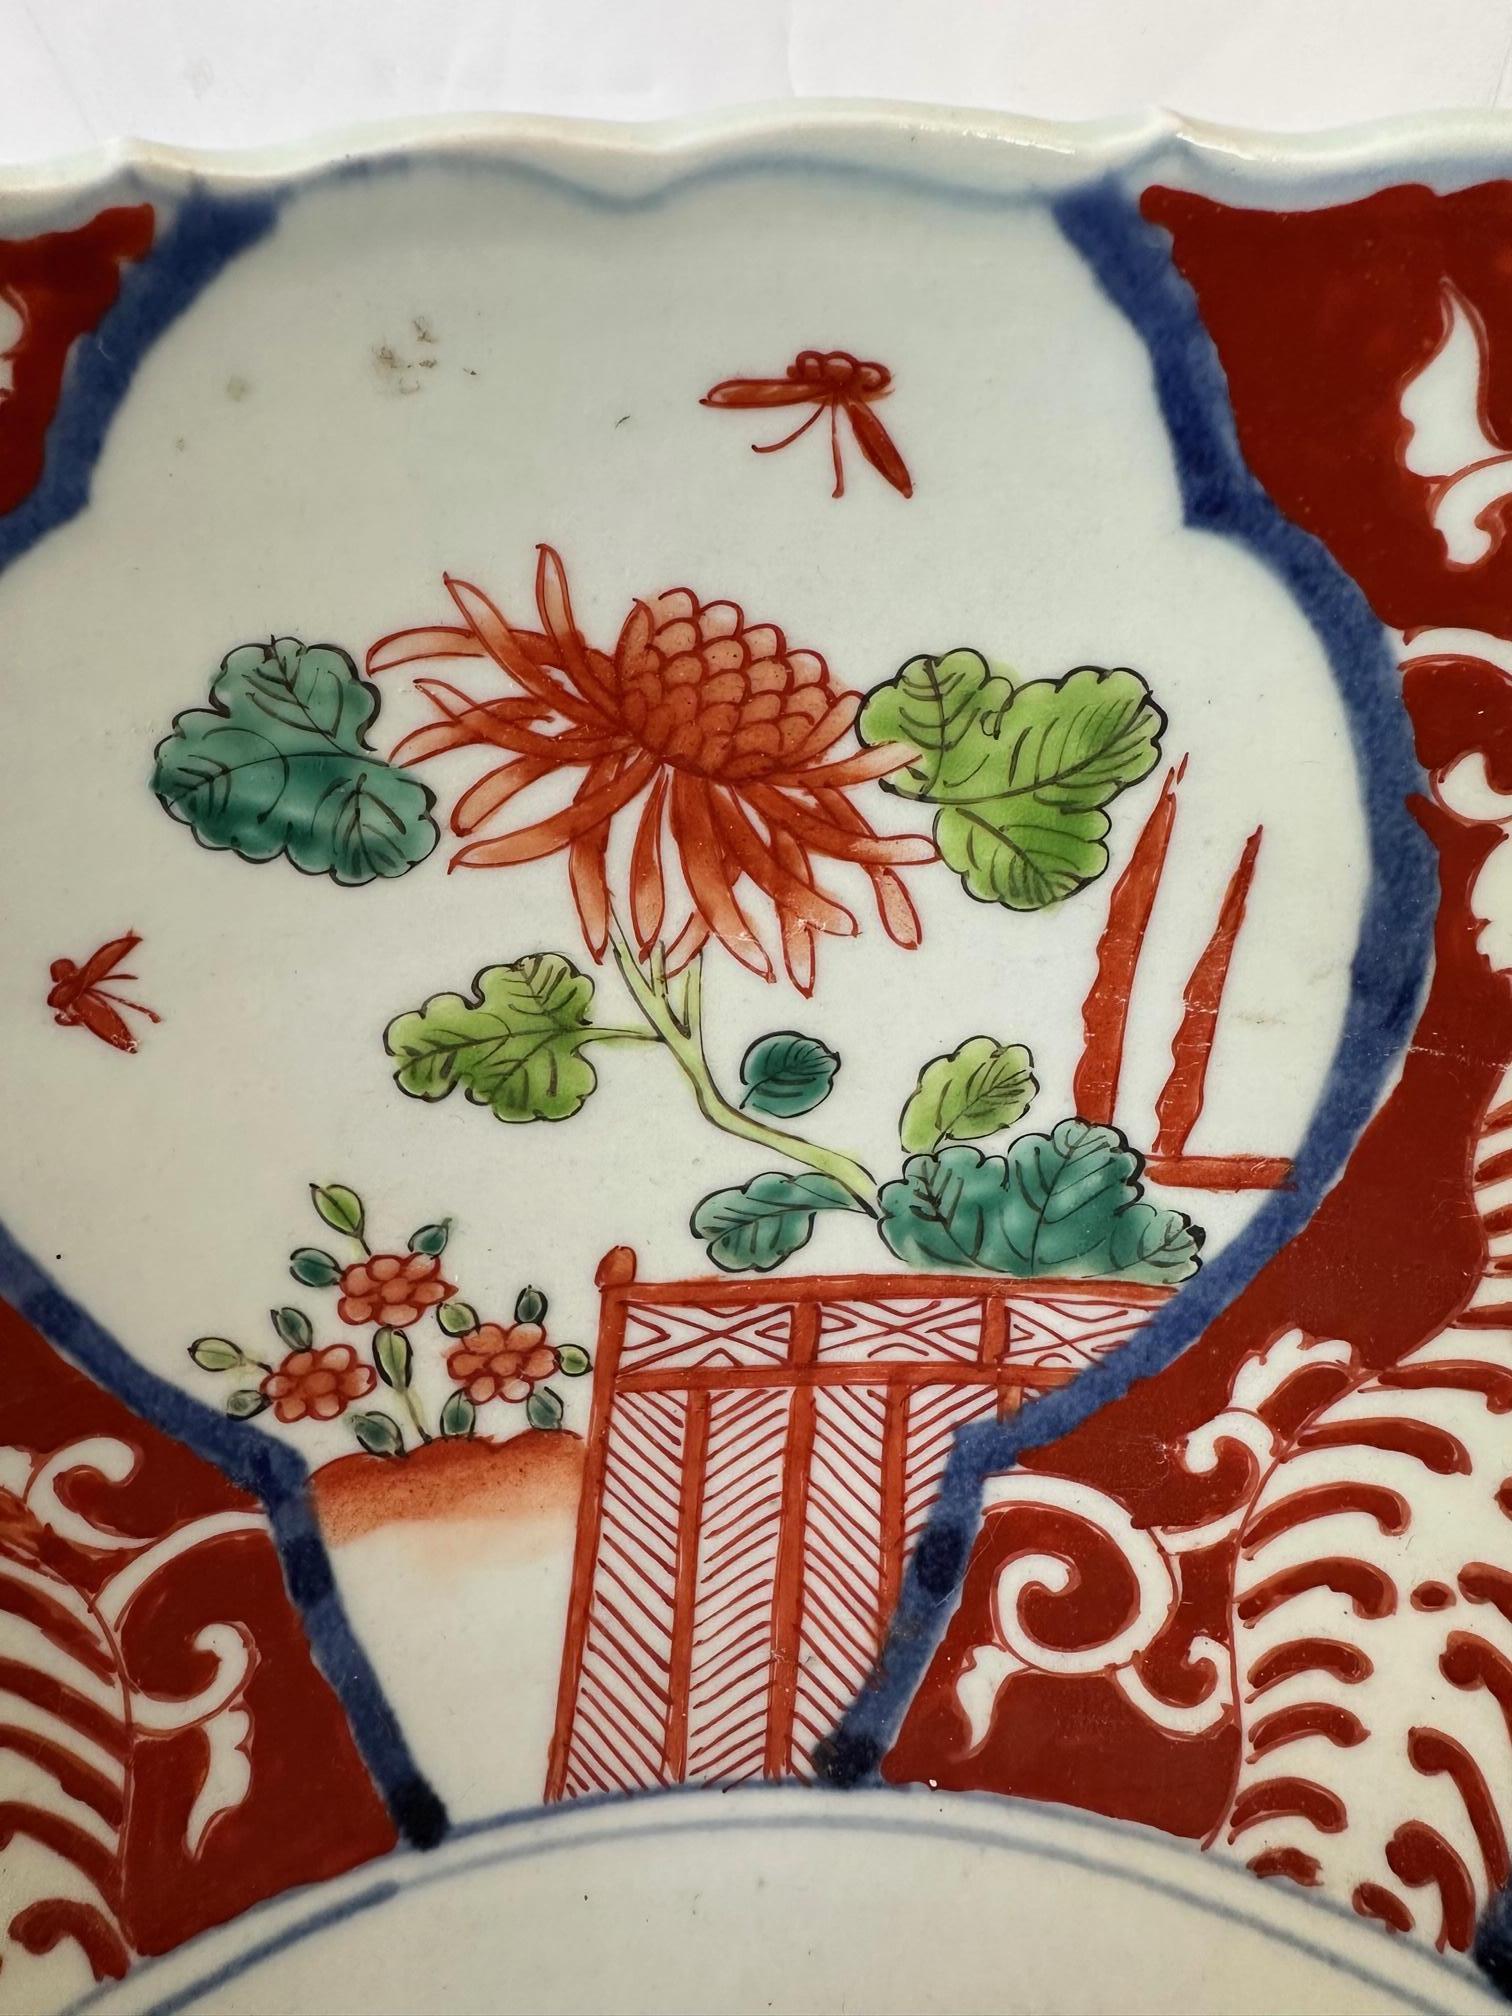 Very large impressive Chinese bowl having beautiful detailed decoration in navy blue, red oxide, soft green and white.